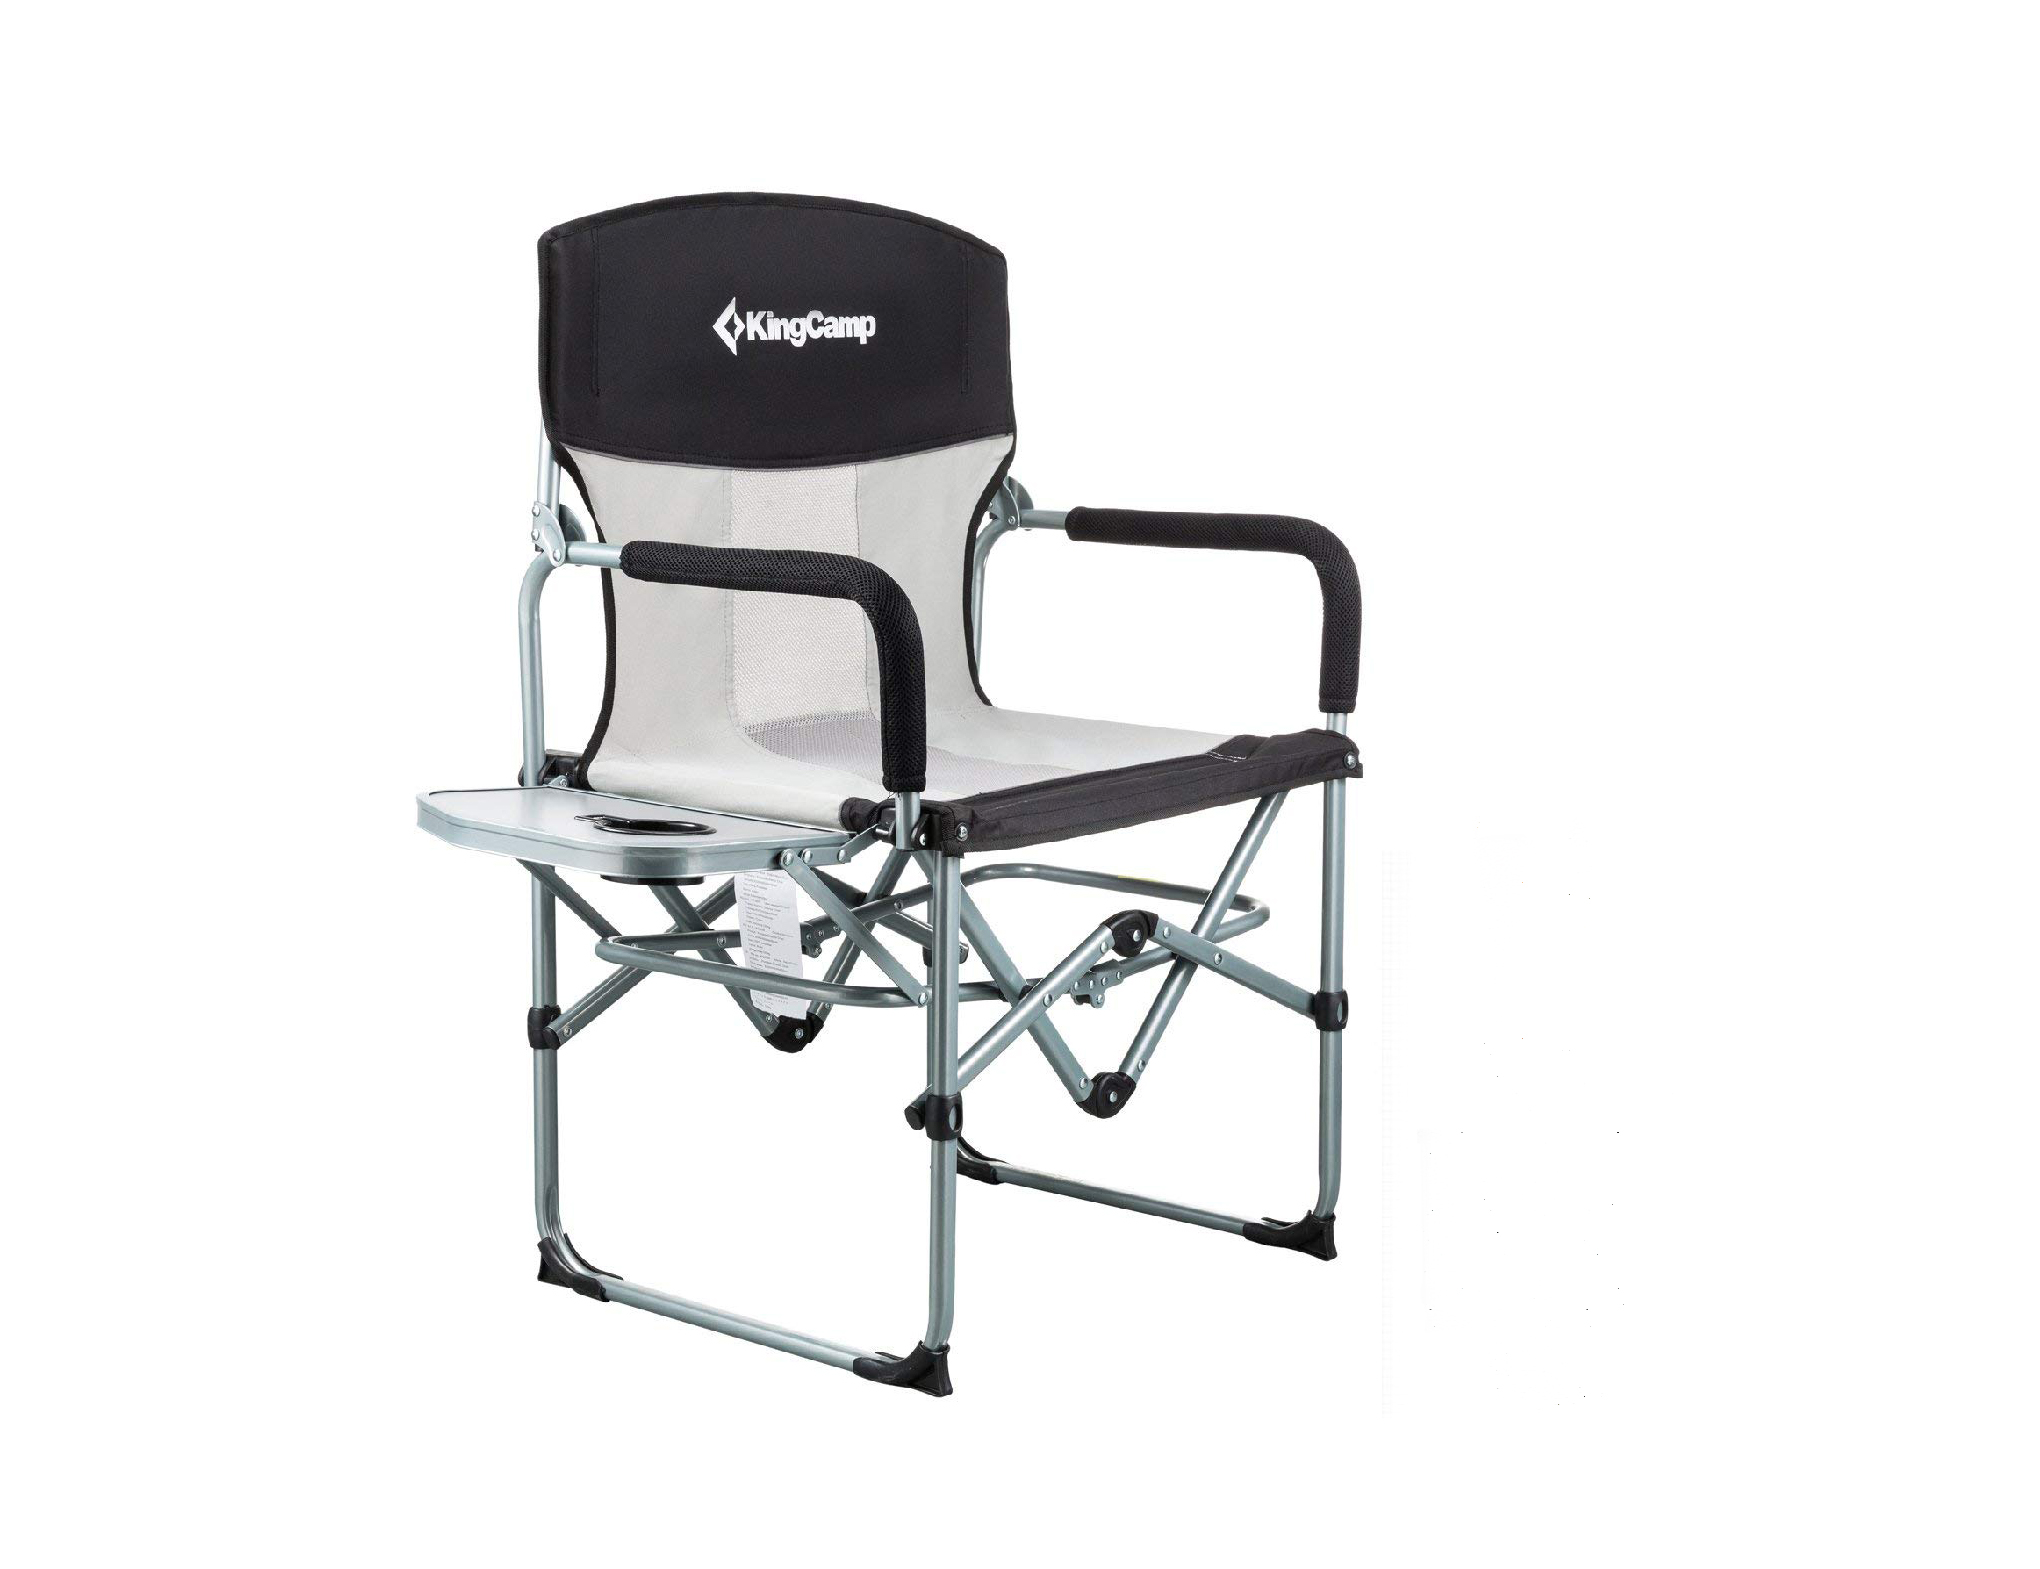 fishing chairs for docks for Sale,Up To OFF 63%